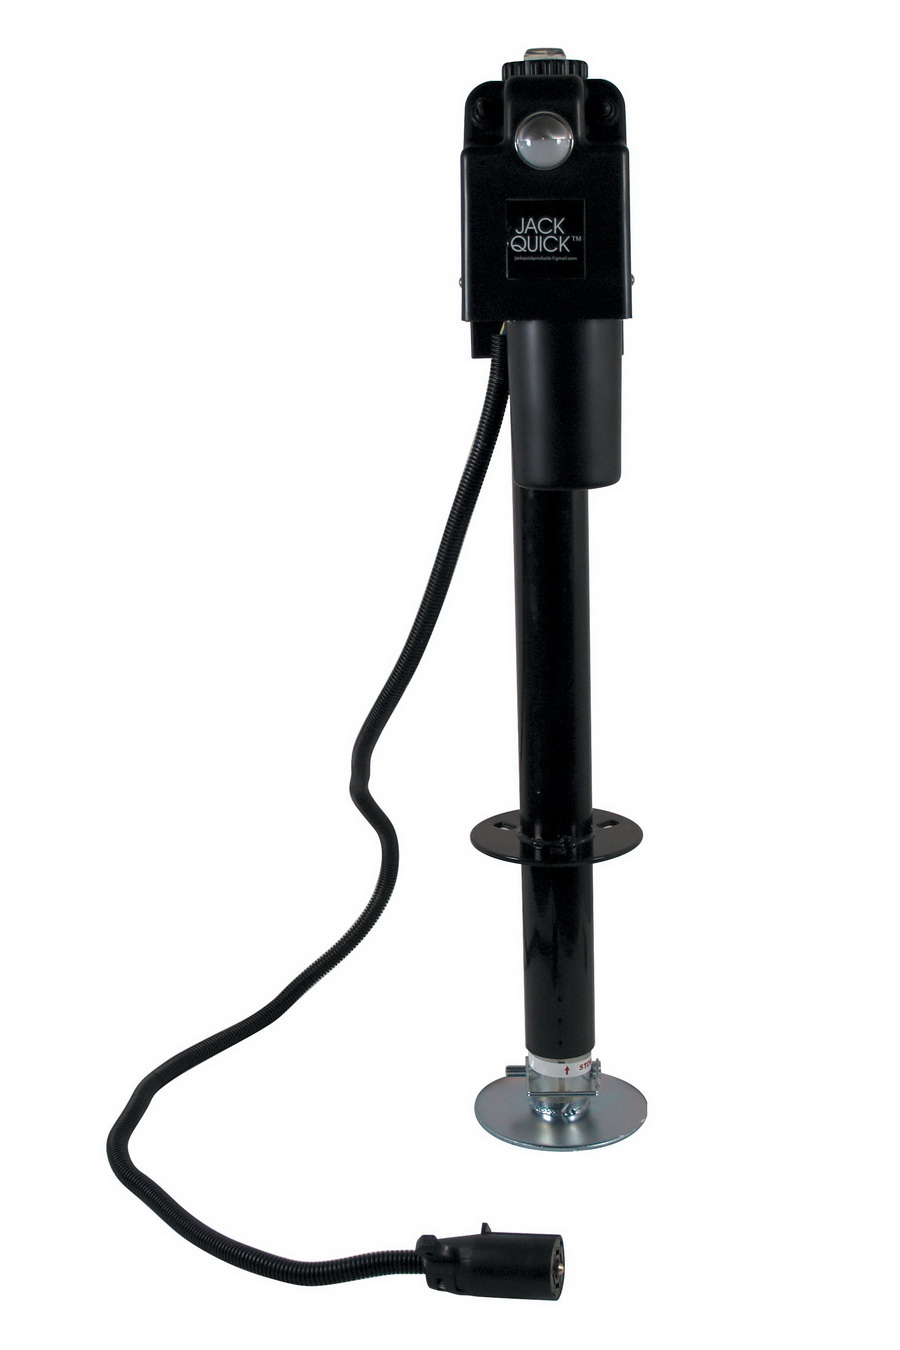 Quick Products JQ 3500B 7P Power A Frame Electric Tongue Jack with 7 Way  Plug 3 650 lbs. Lift Capacity Black